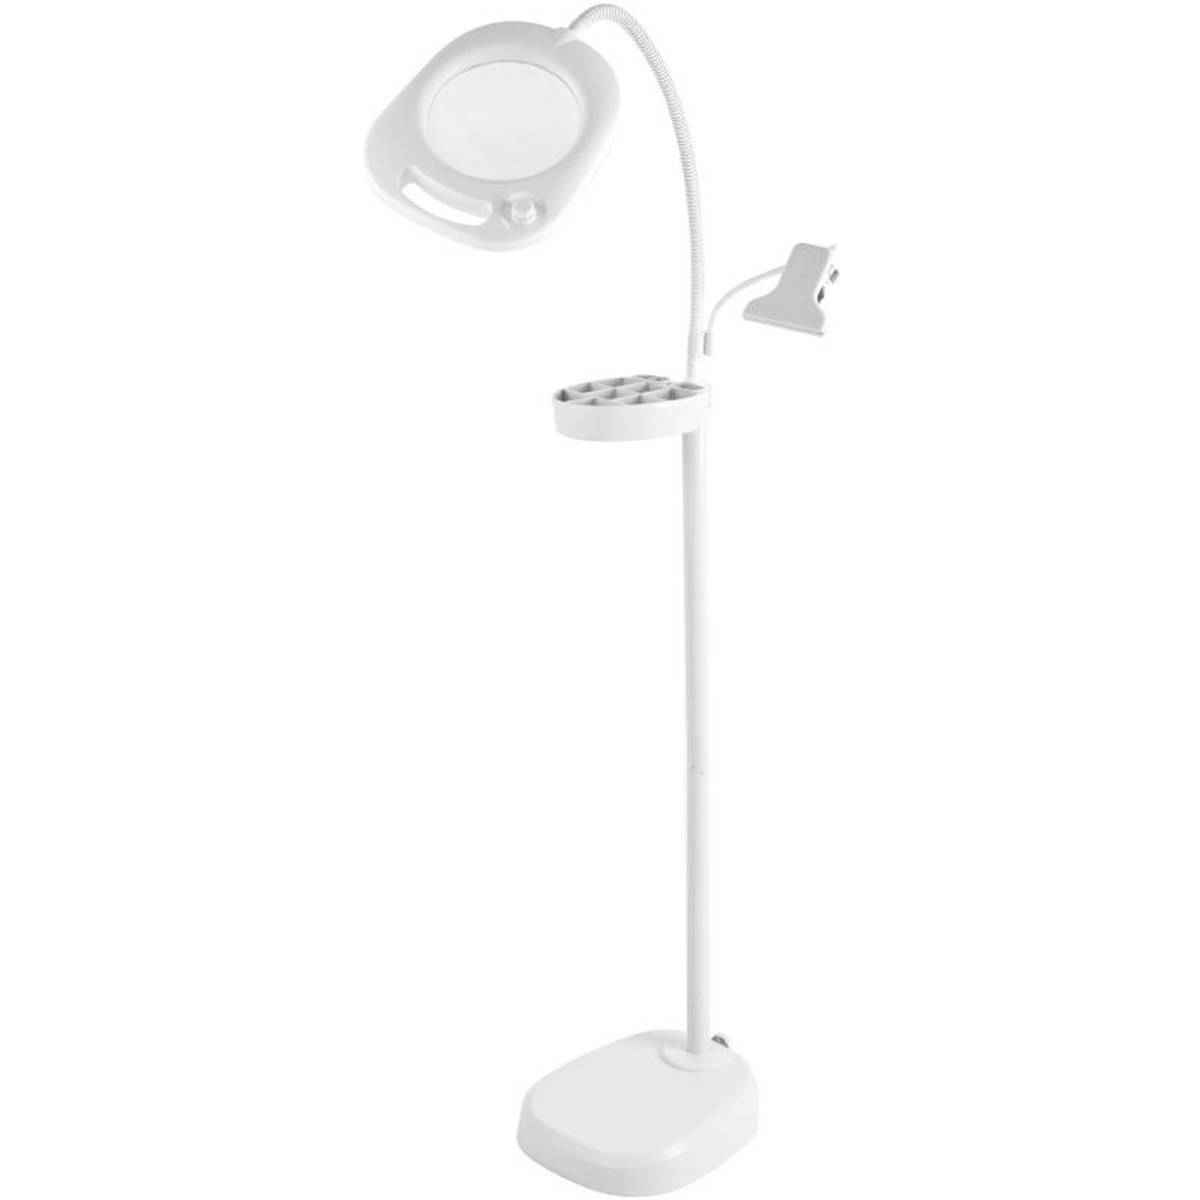 Attractive Daylight Floor Standing Lamp With Magnifier for proportions 1200 X 1200